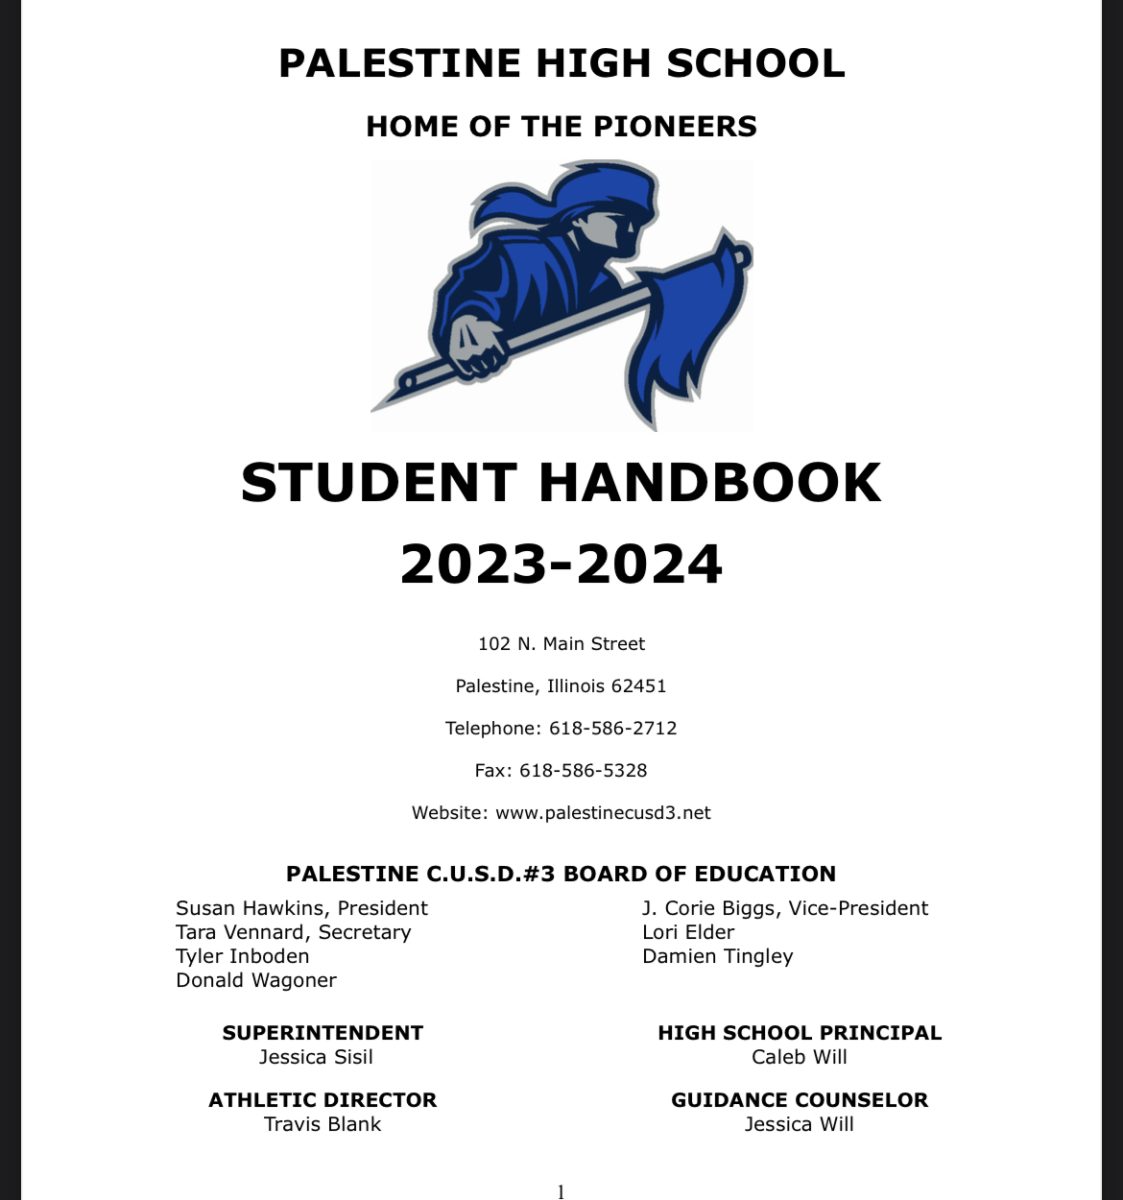 Changes to the Handbook.